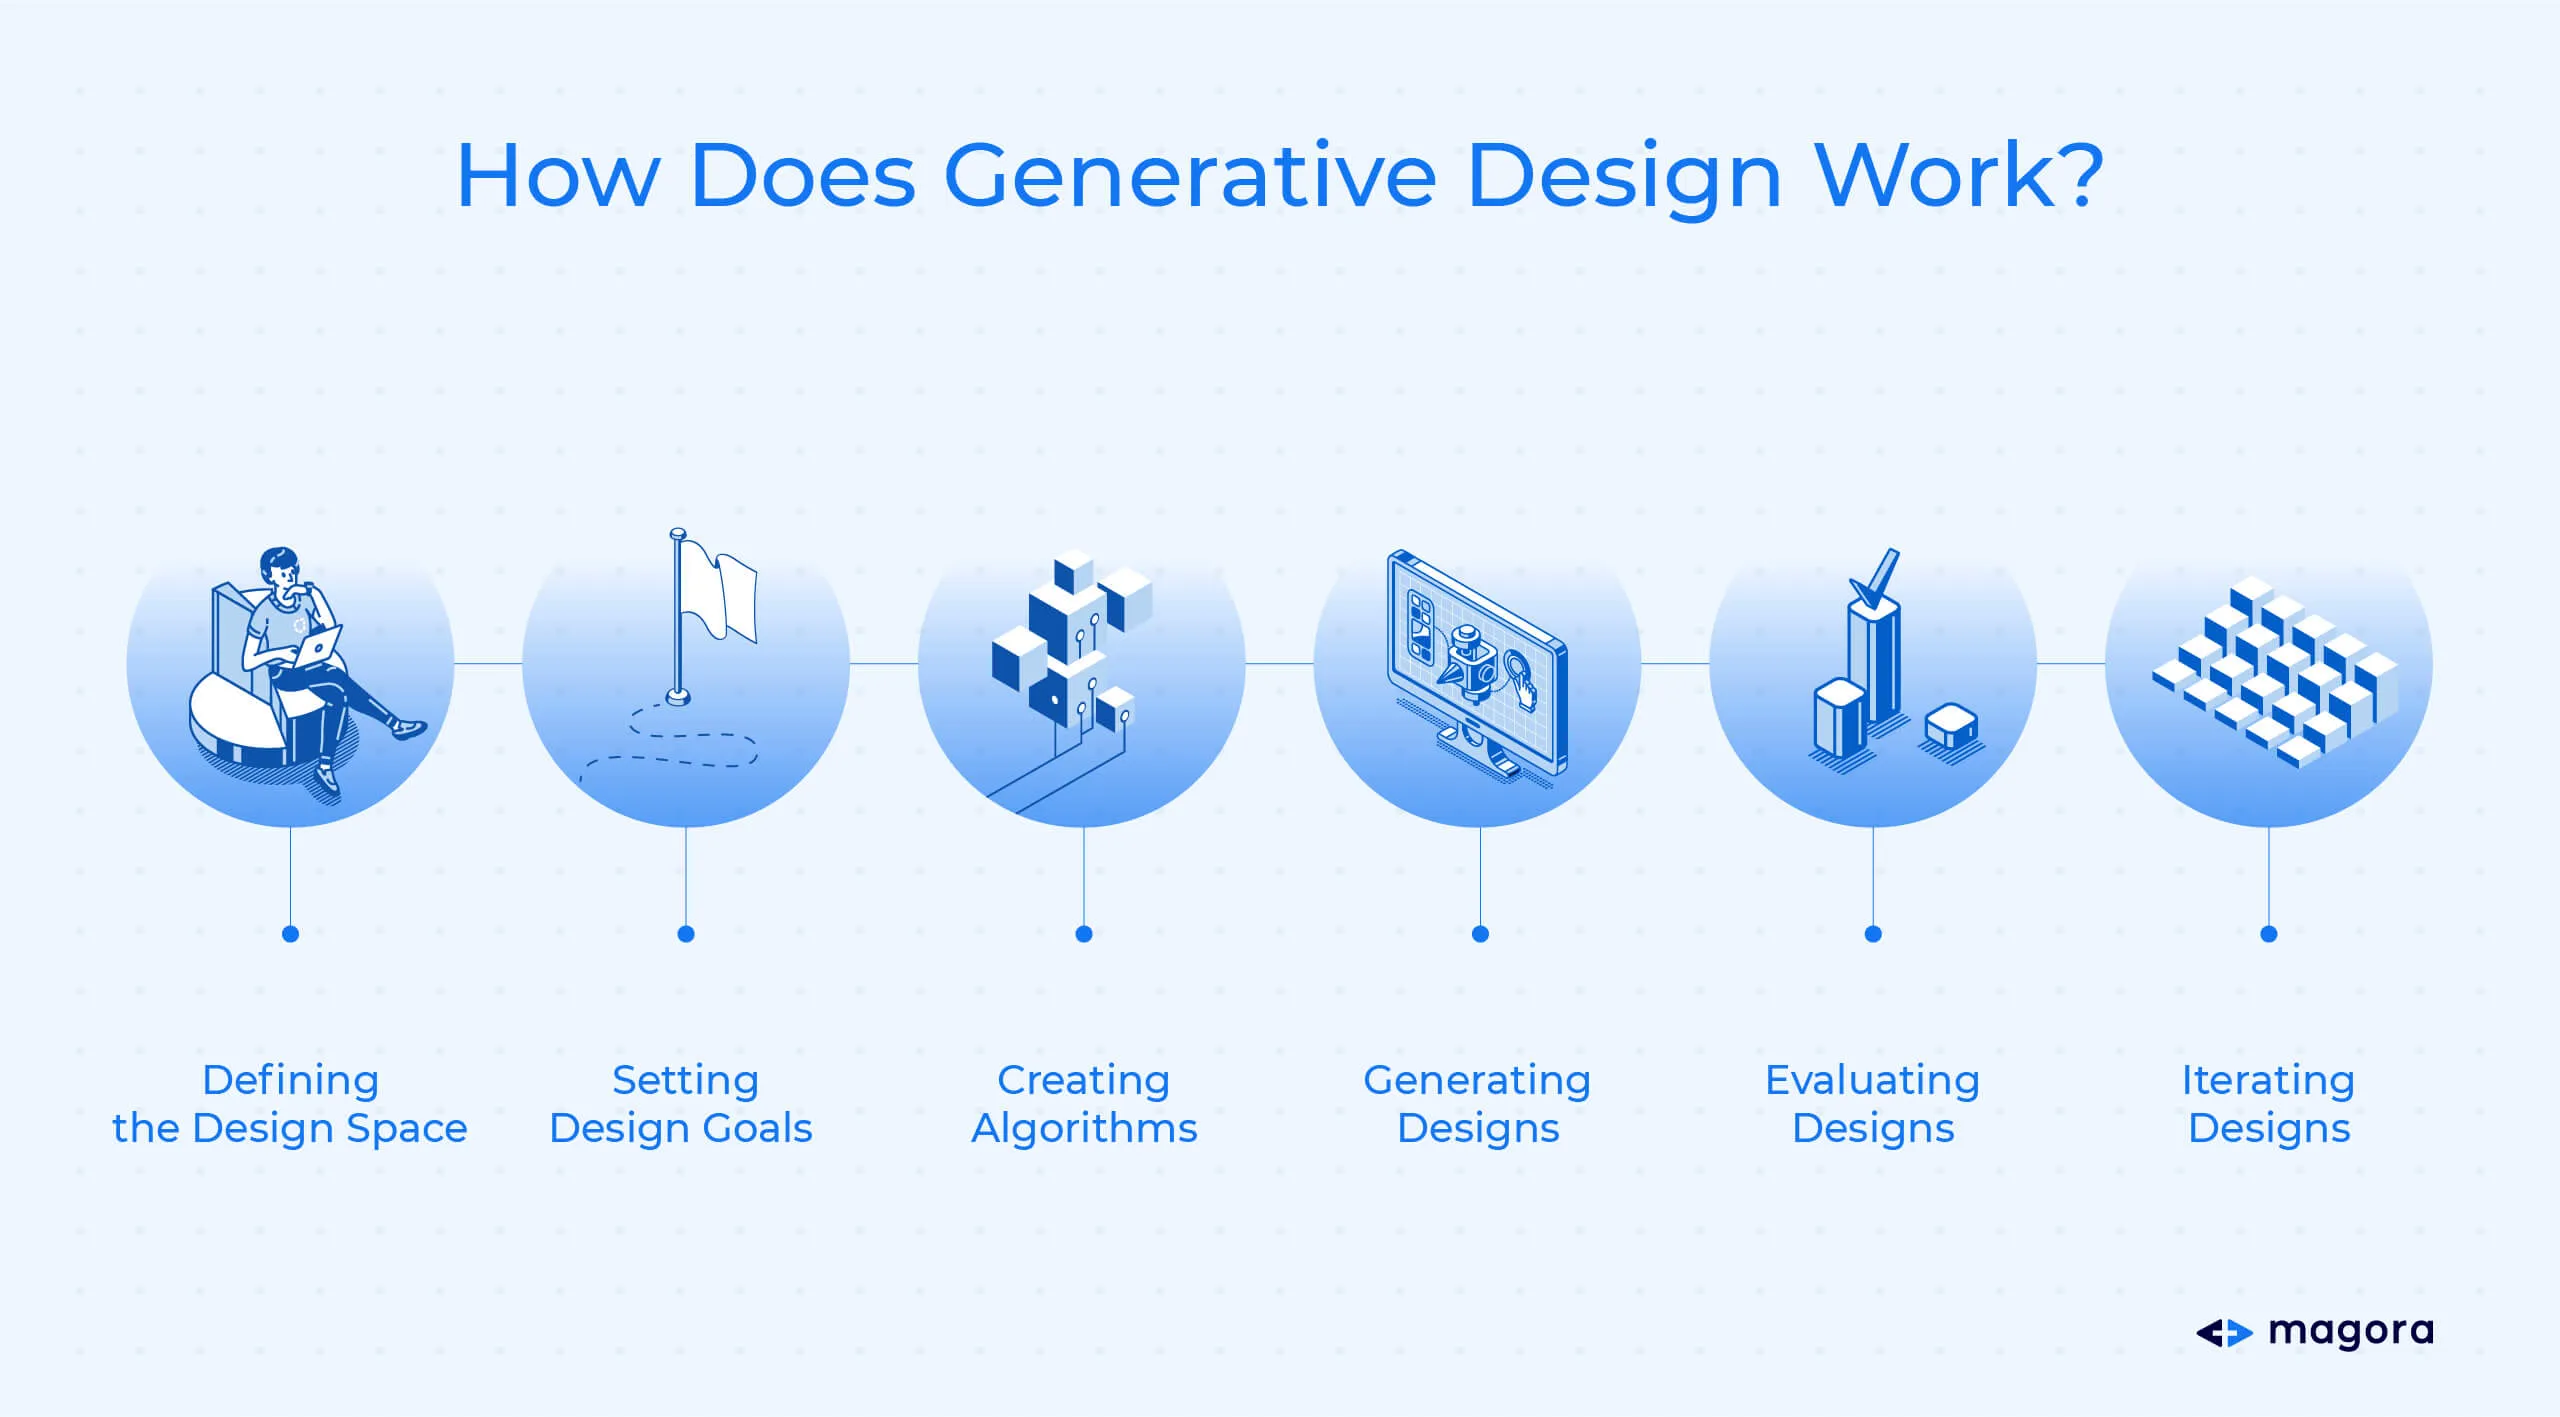 How Does Generative Design Work